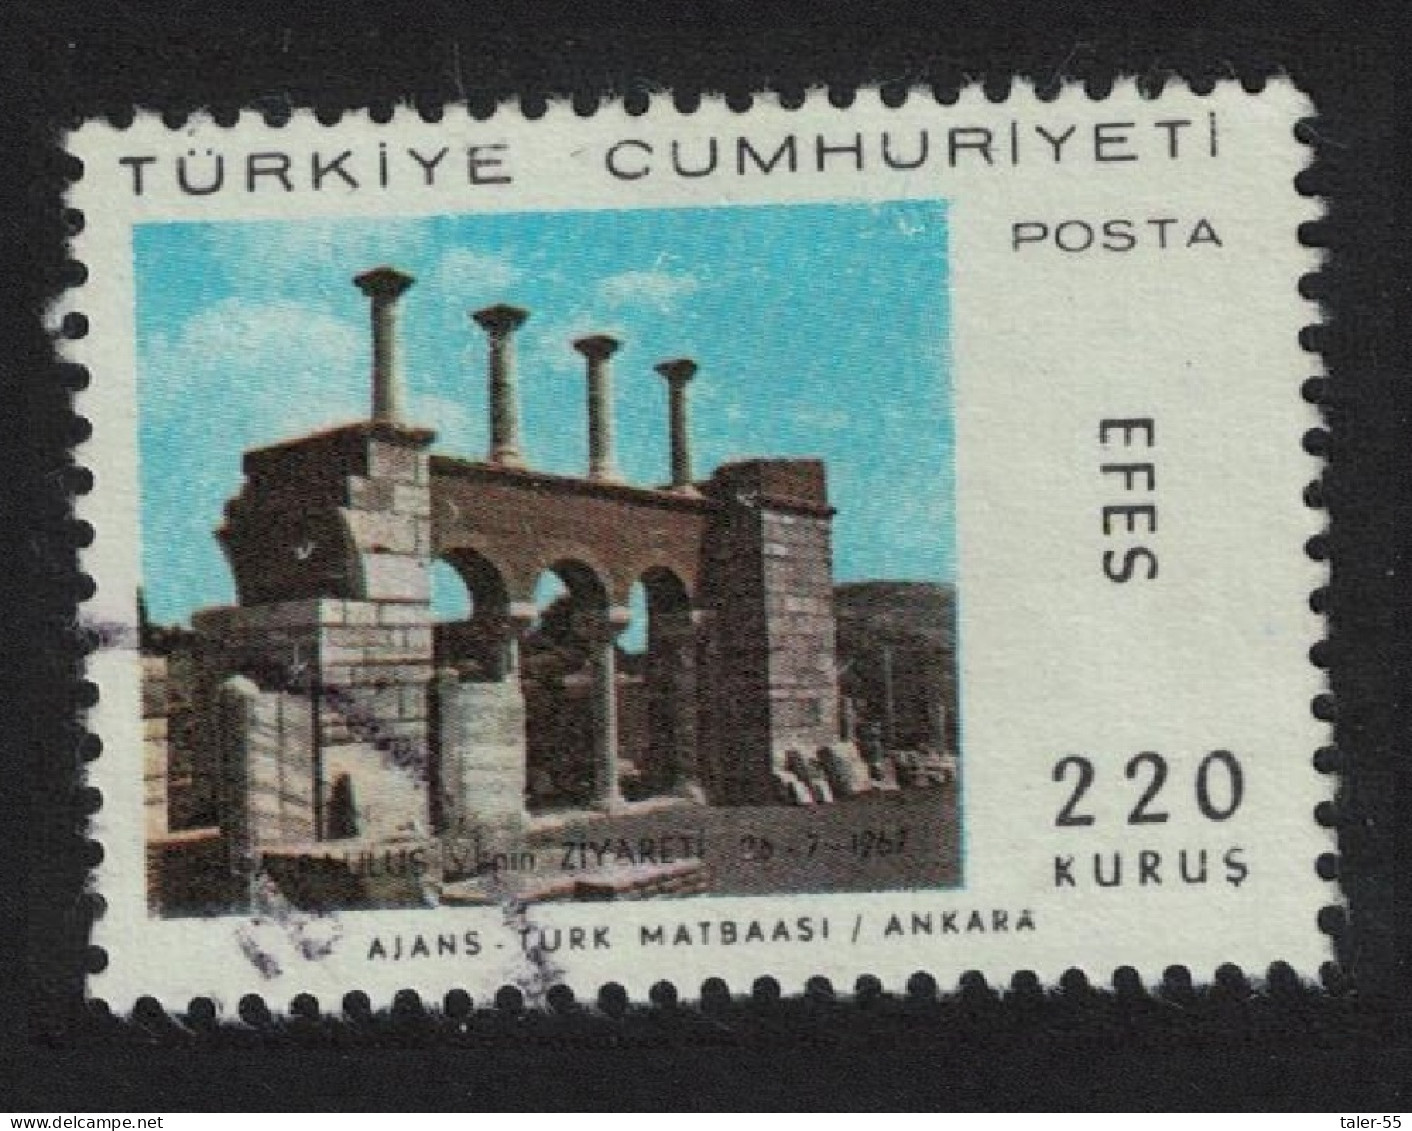 Turkey Pope Paul VI's Visit To Virgin Mary's House Ephesus 1967 Canc SG#2207 Sc#1750 - Used Stamps